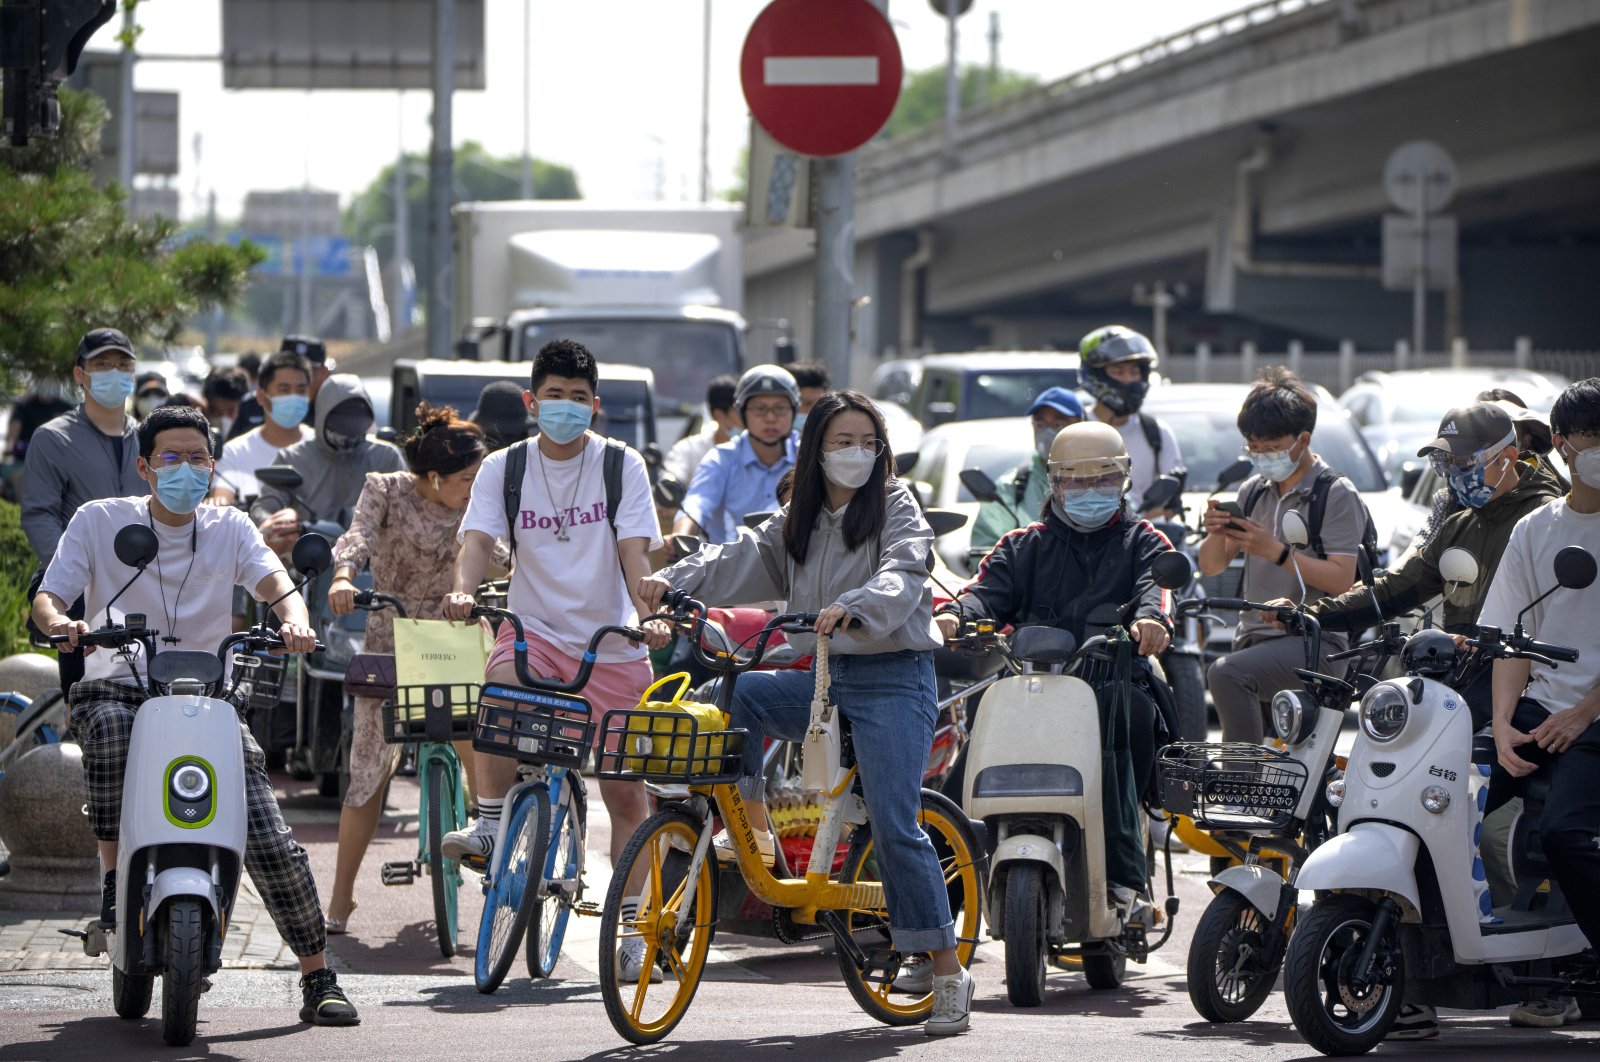 Commuters wearing face masks wait at an intersection in the central business district (CBD) in Beijing, China, May 31, 2022. (AP Photo)